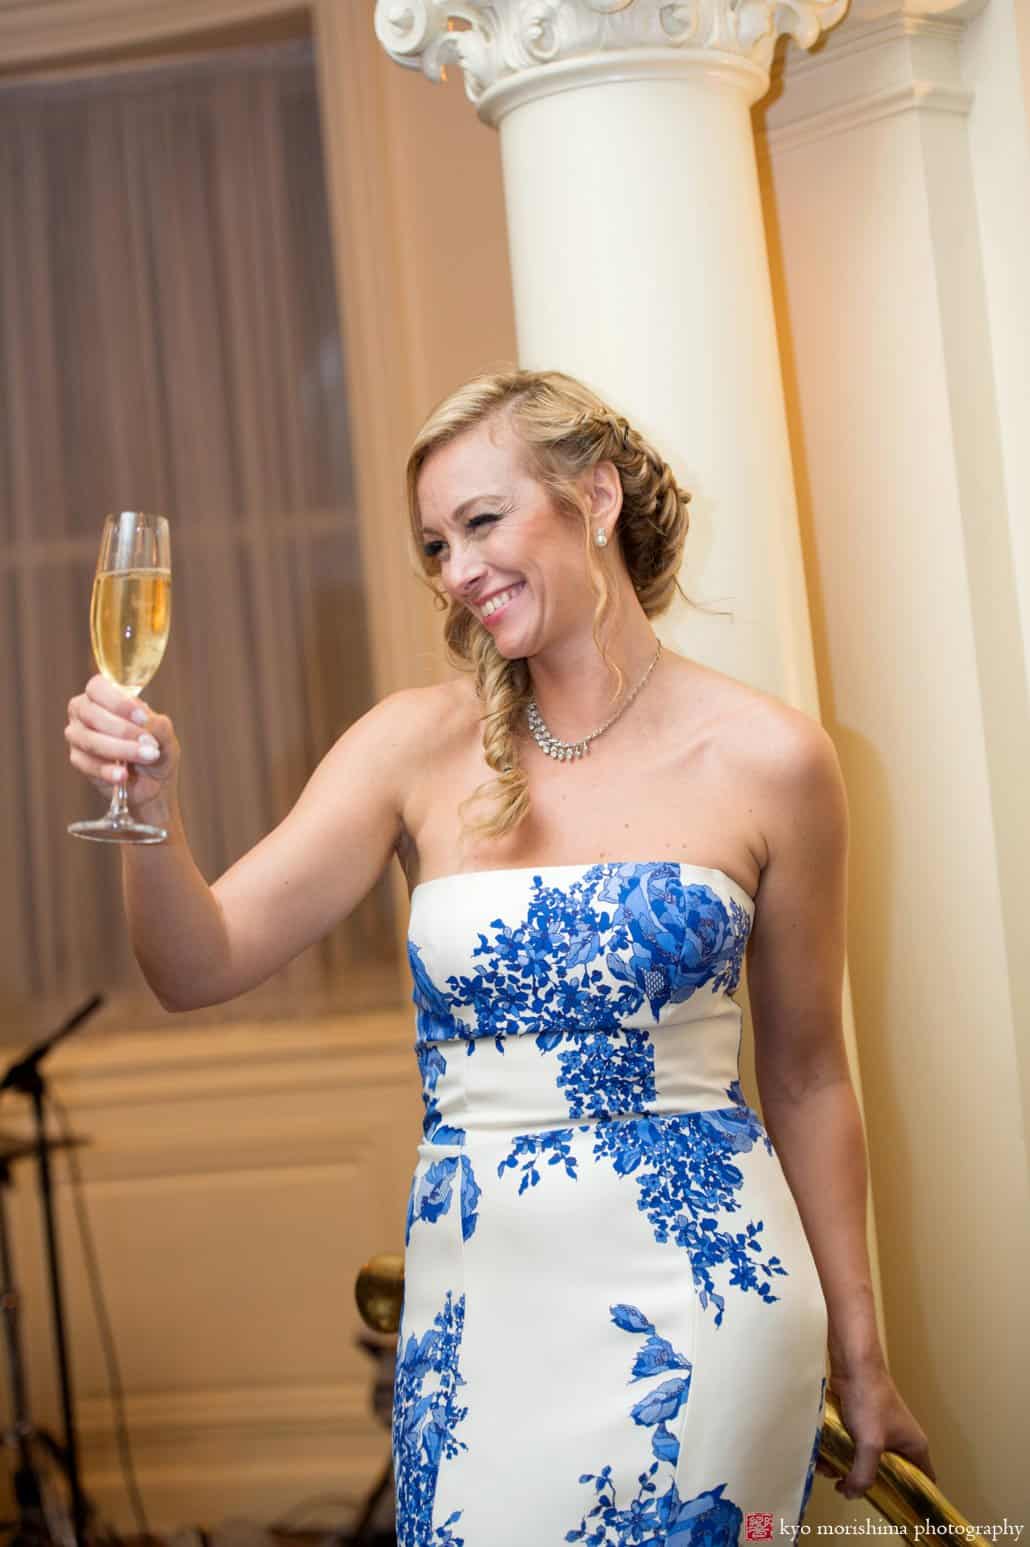 Bride wearing blue and white rose printed Monique Lhuillier wedding dress raises a toast at Lotos Club wedding on the Upper East Side, photographed by Kyo Morishima